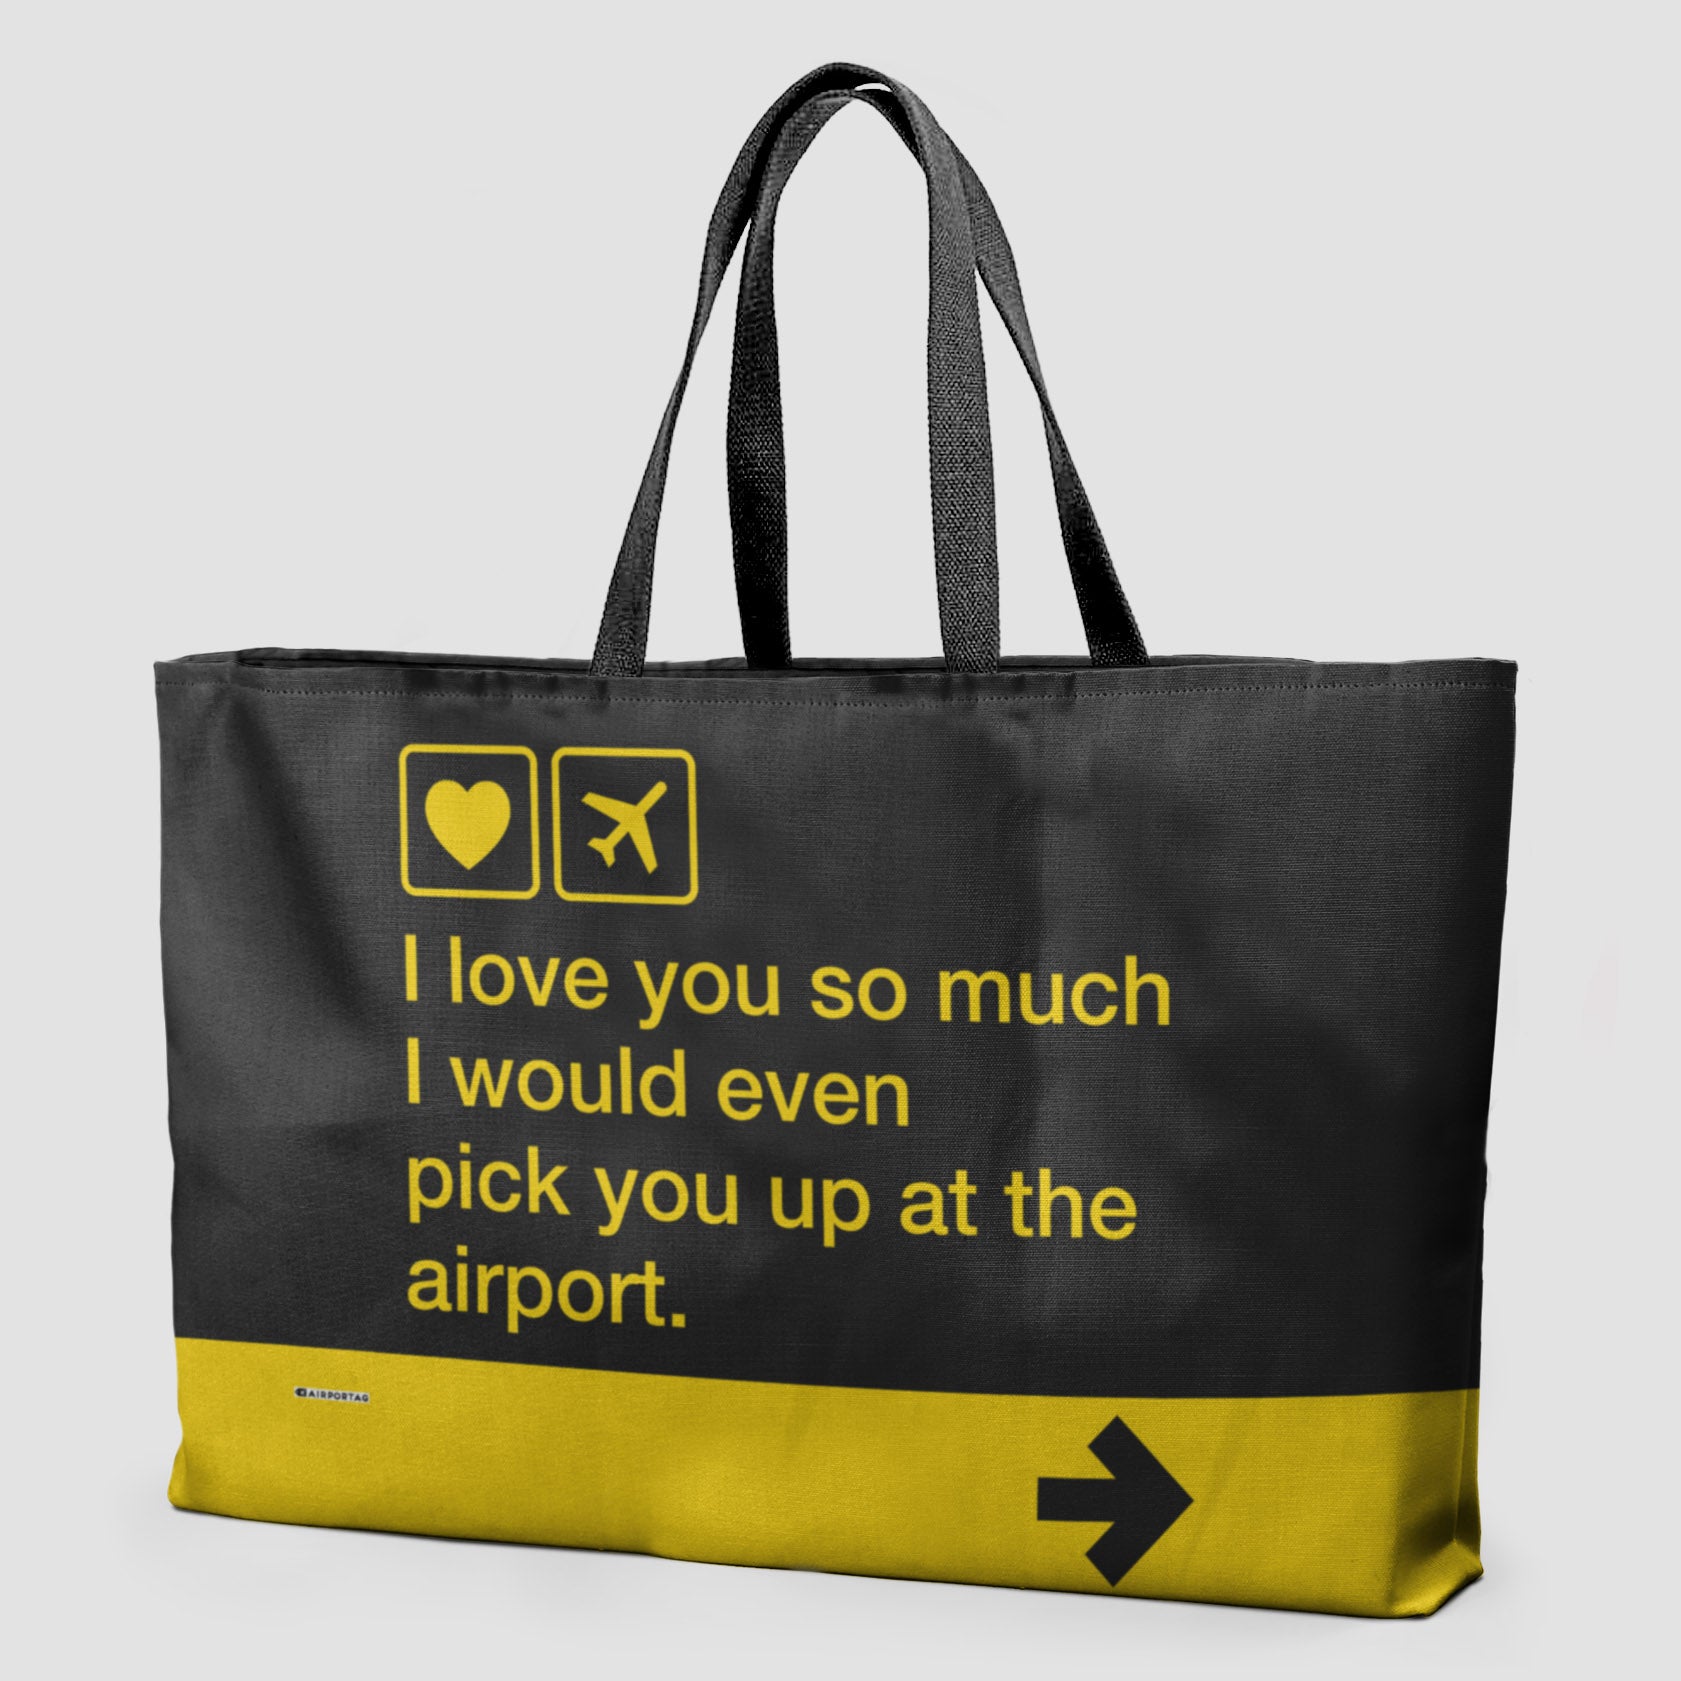 I love you ... pick you up at the airport - Weekender Bag - Airportag